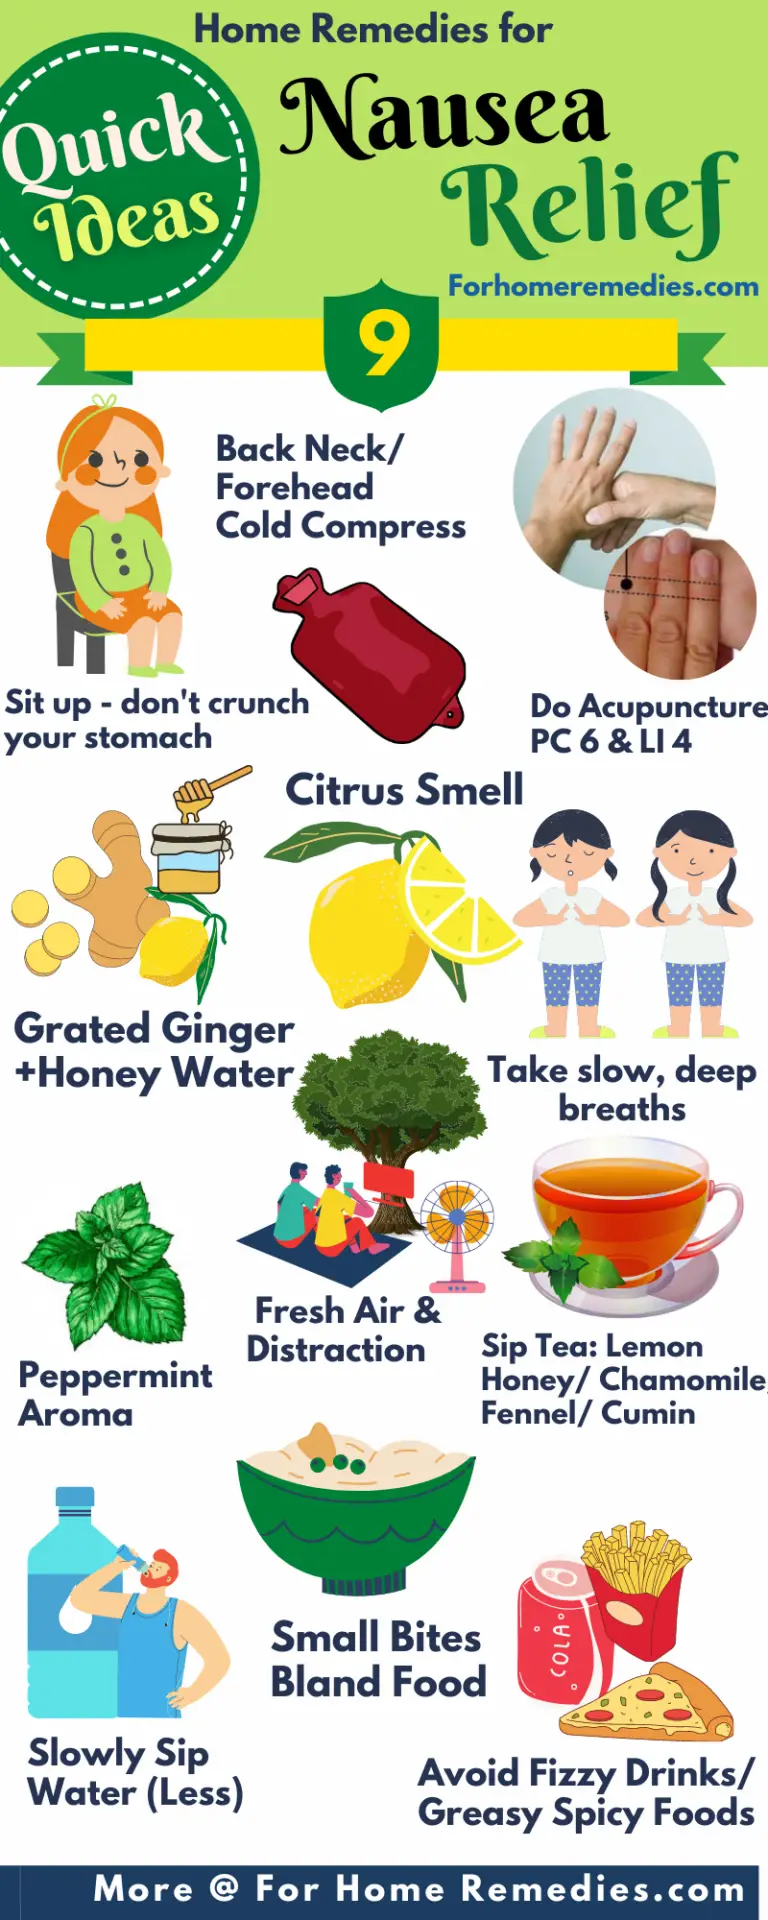 Nausea Instant Quick Relief Home Remedies To Get Rid Of Nausea 768x1920 